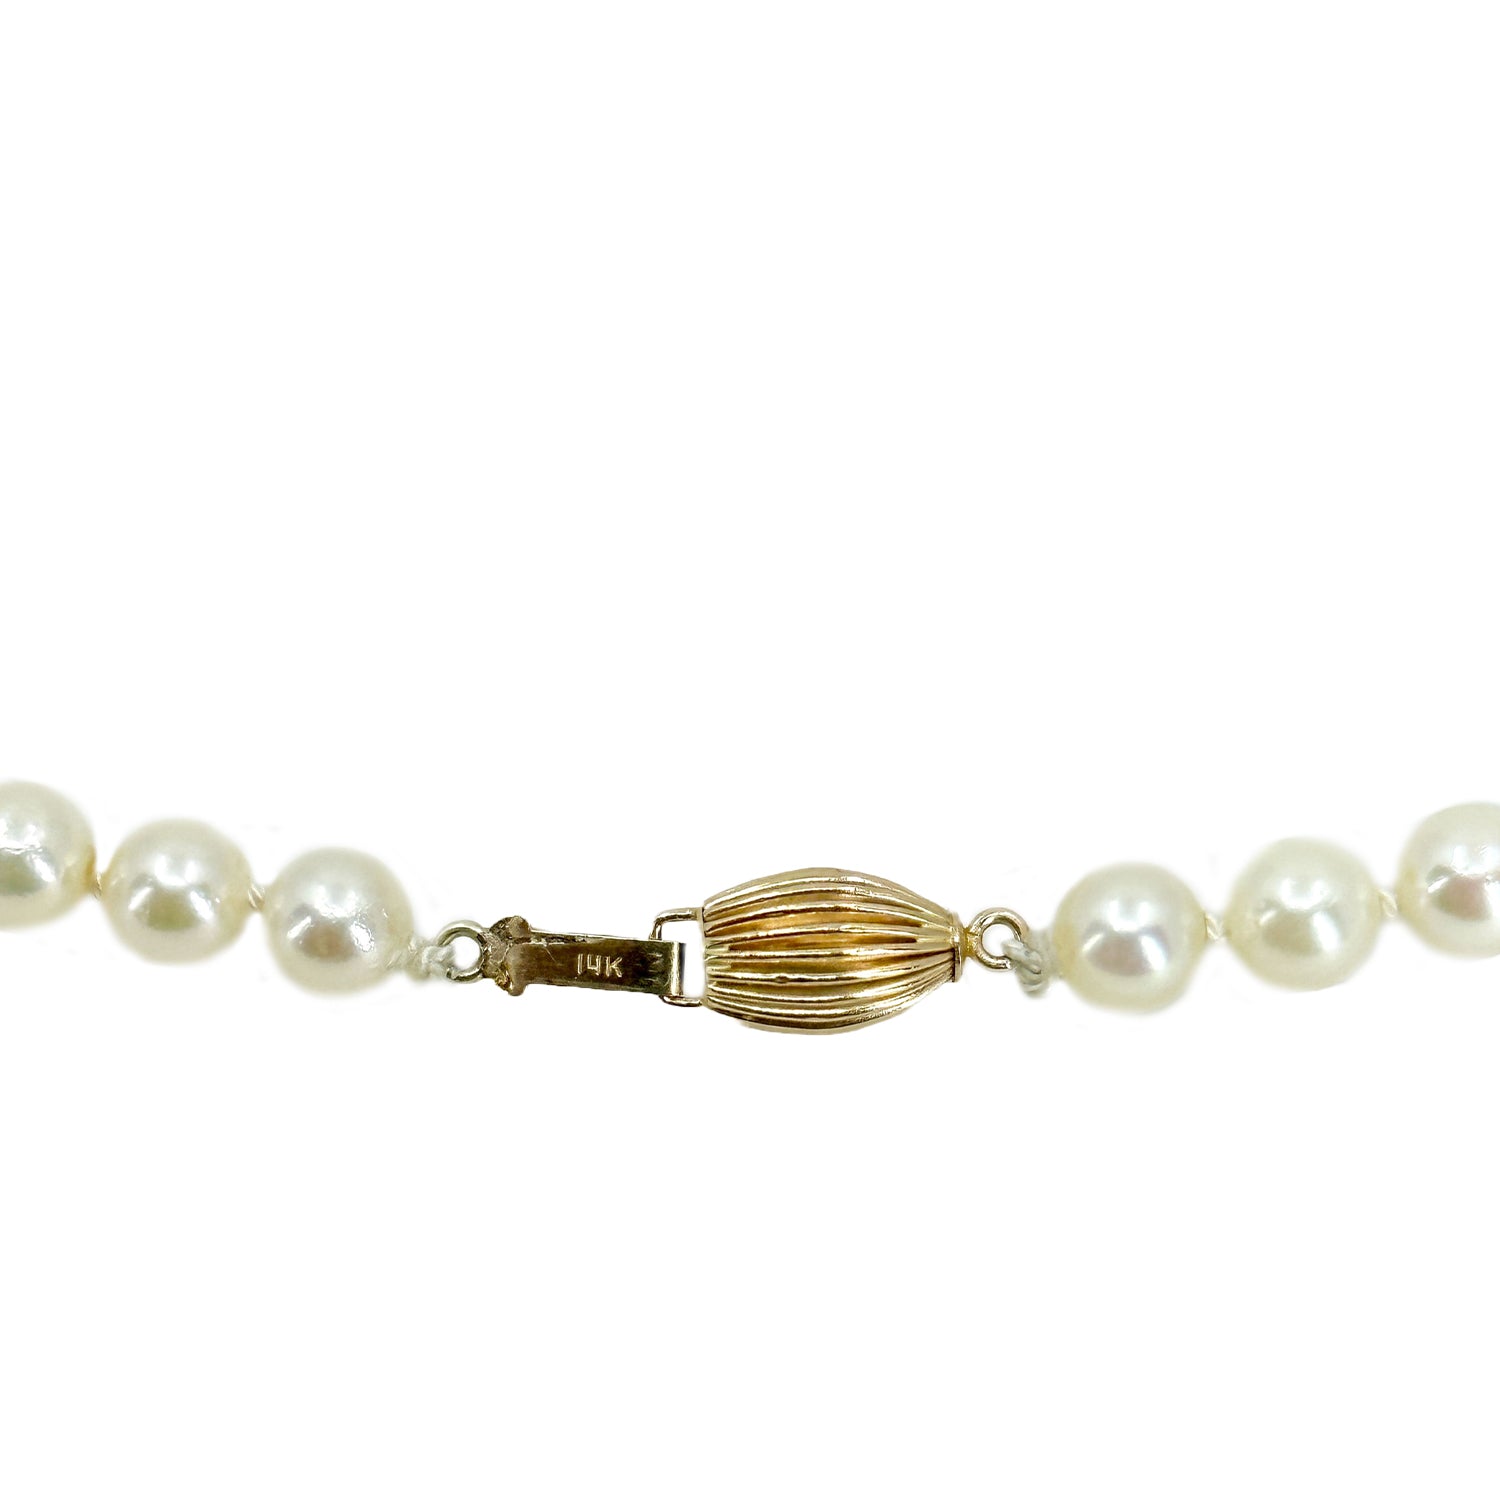 Vintage Opera Length Saltwater Japanese Akoya Cultured Pearl Necklace Strand - 14K Yellow Gold 29 Inch